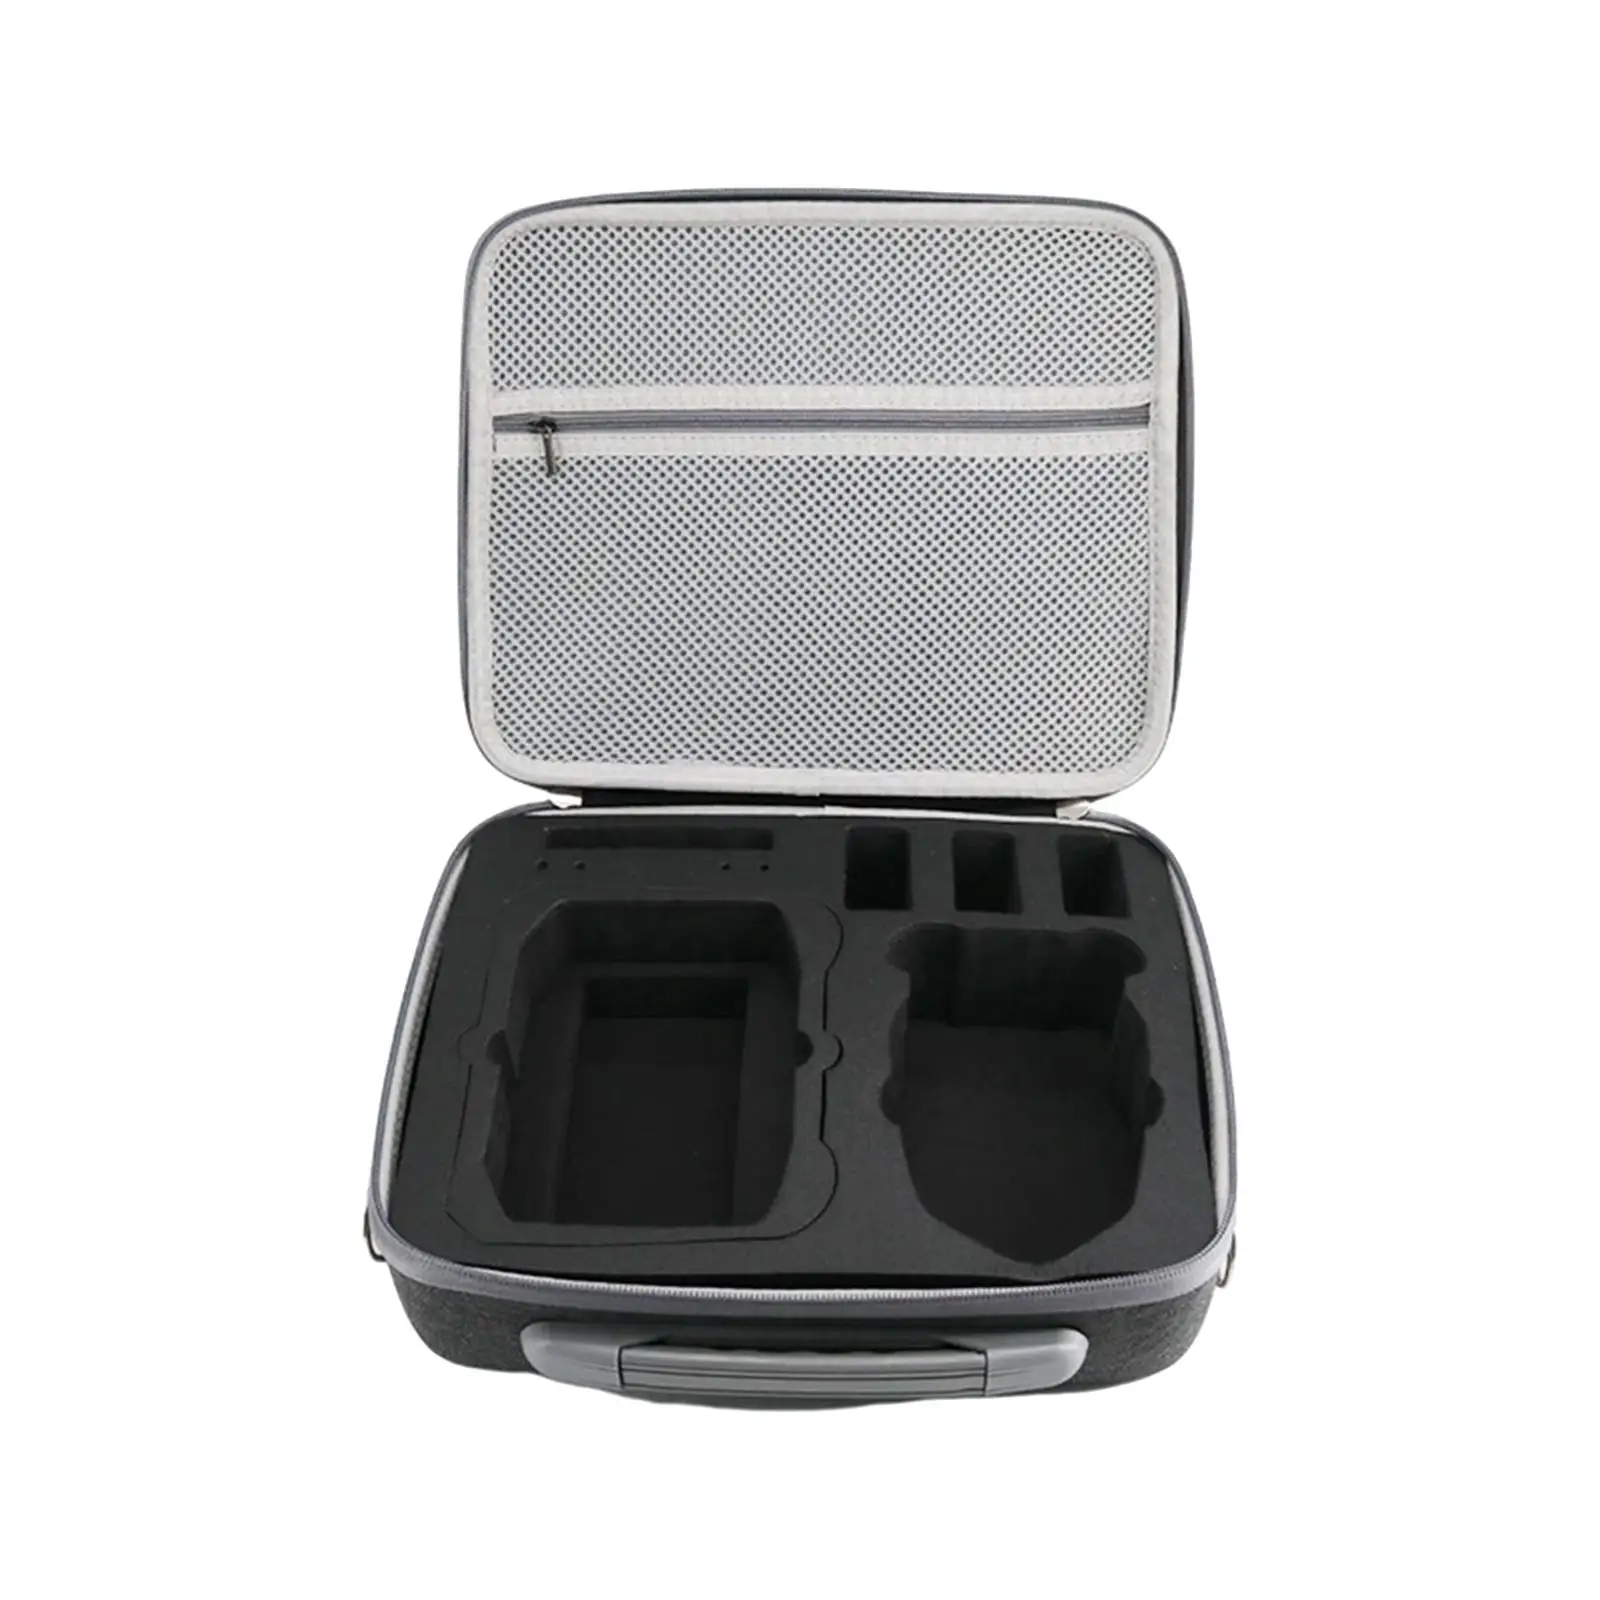 Travel Carrying Case Large Capacity with Removable Shoulder Strap Storage Shoulder Bag Storage Bag for RC Quadcopter Accessories